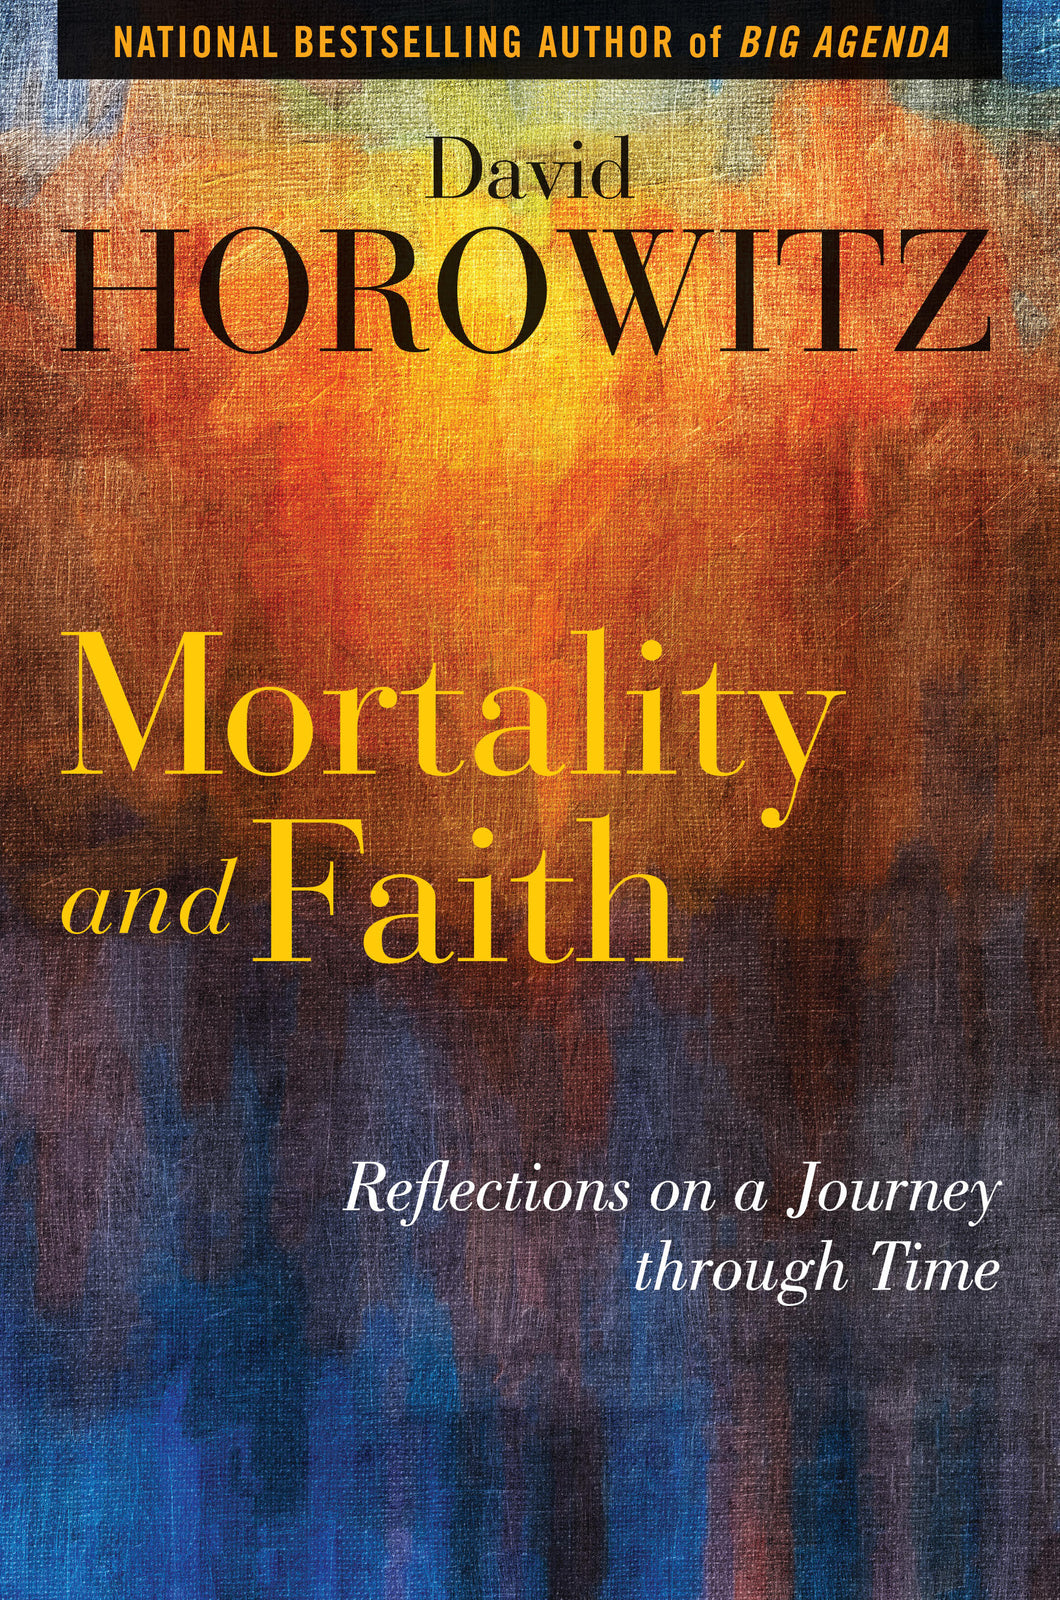 Mortality & Faith: Reflections on a Journey through Time